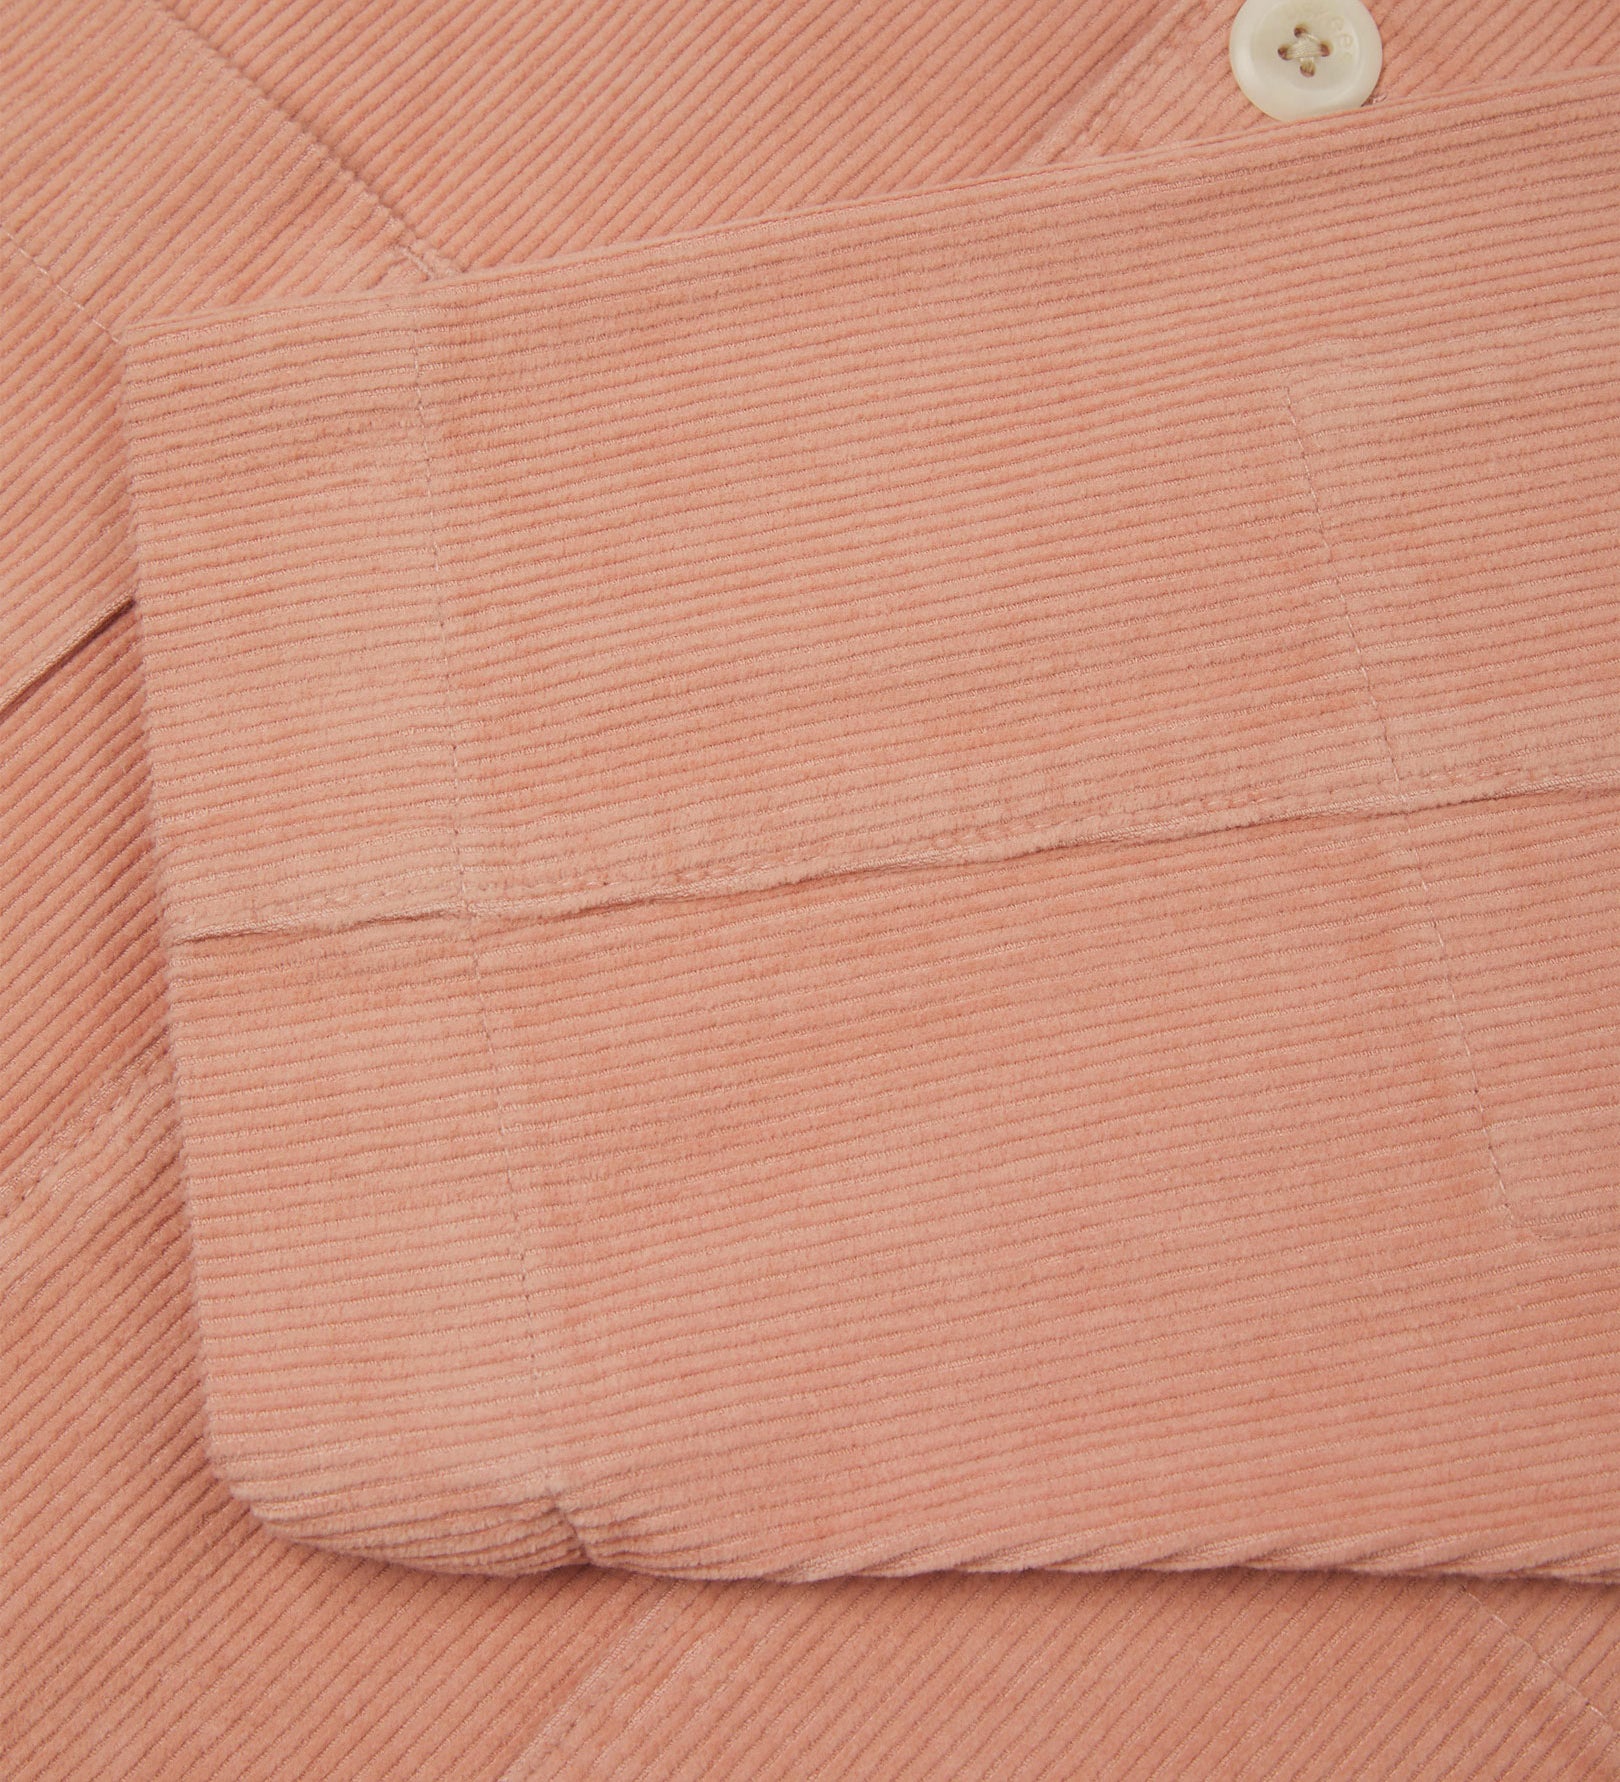 Close-up view of cuff, placket and corozo buttons of organic corduroy, 'dusty pink' blazer from Uskees.